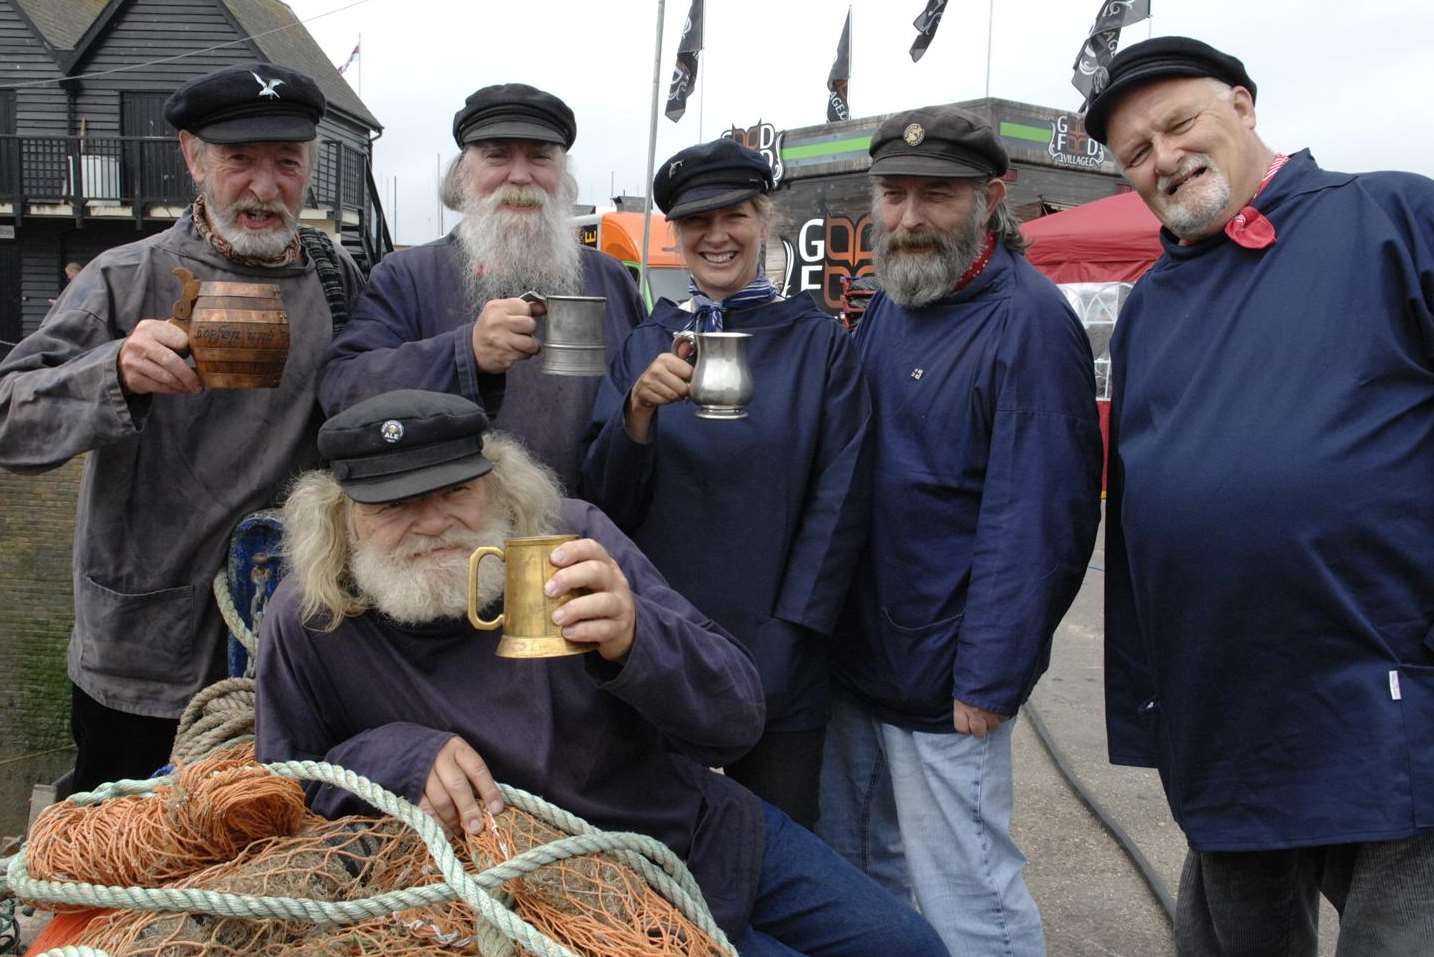 The Shipwright Shanty Crew at the Whitstable Oyster Festival